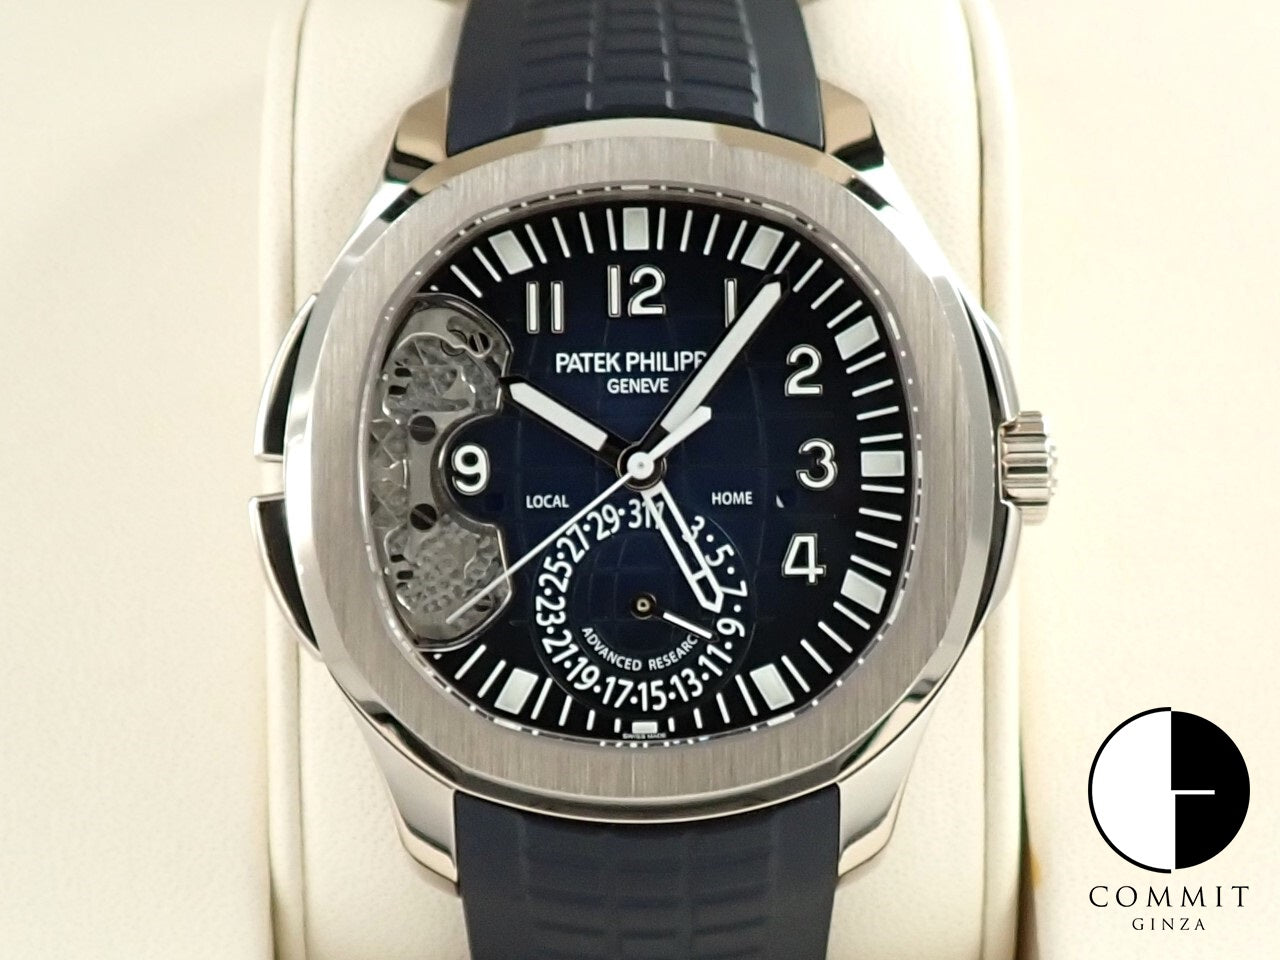 Patek Philippe Advanced Research Aquanaut Travel Time Ref.5650G-001 18KWG Blue Dial